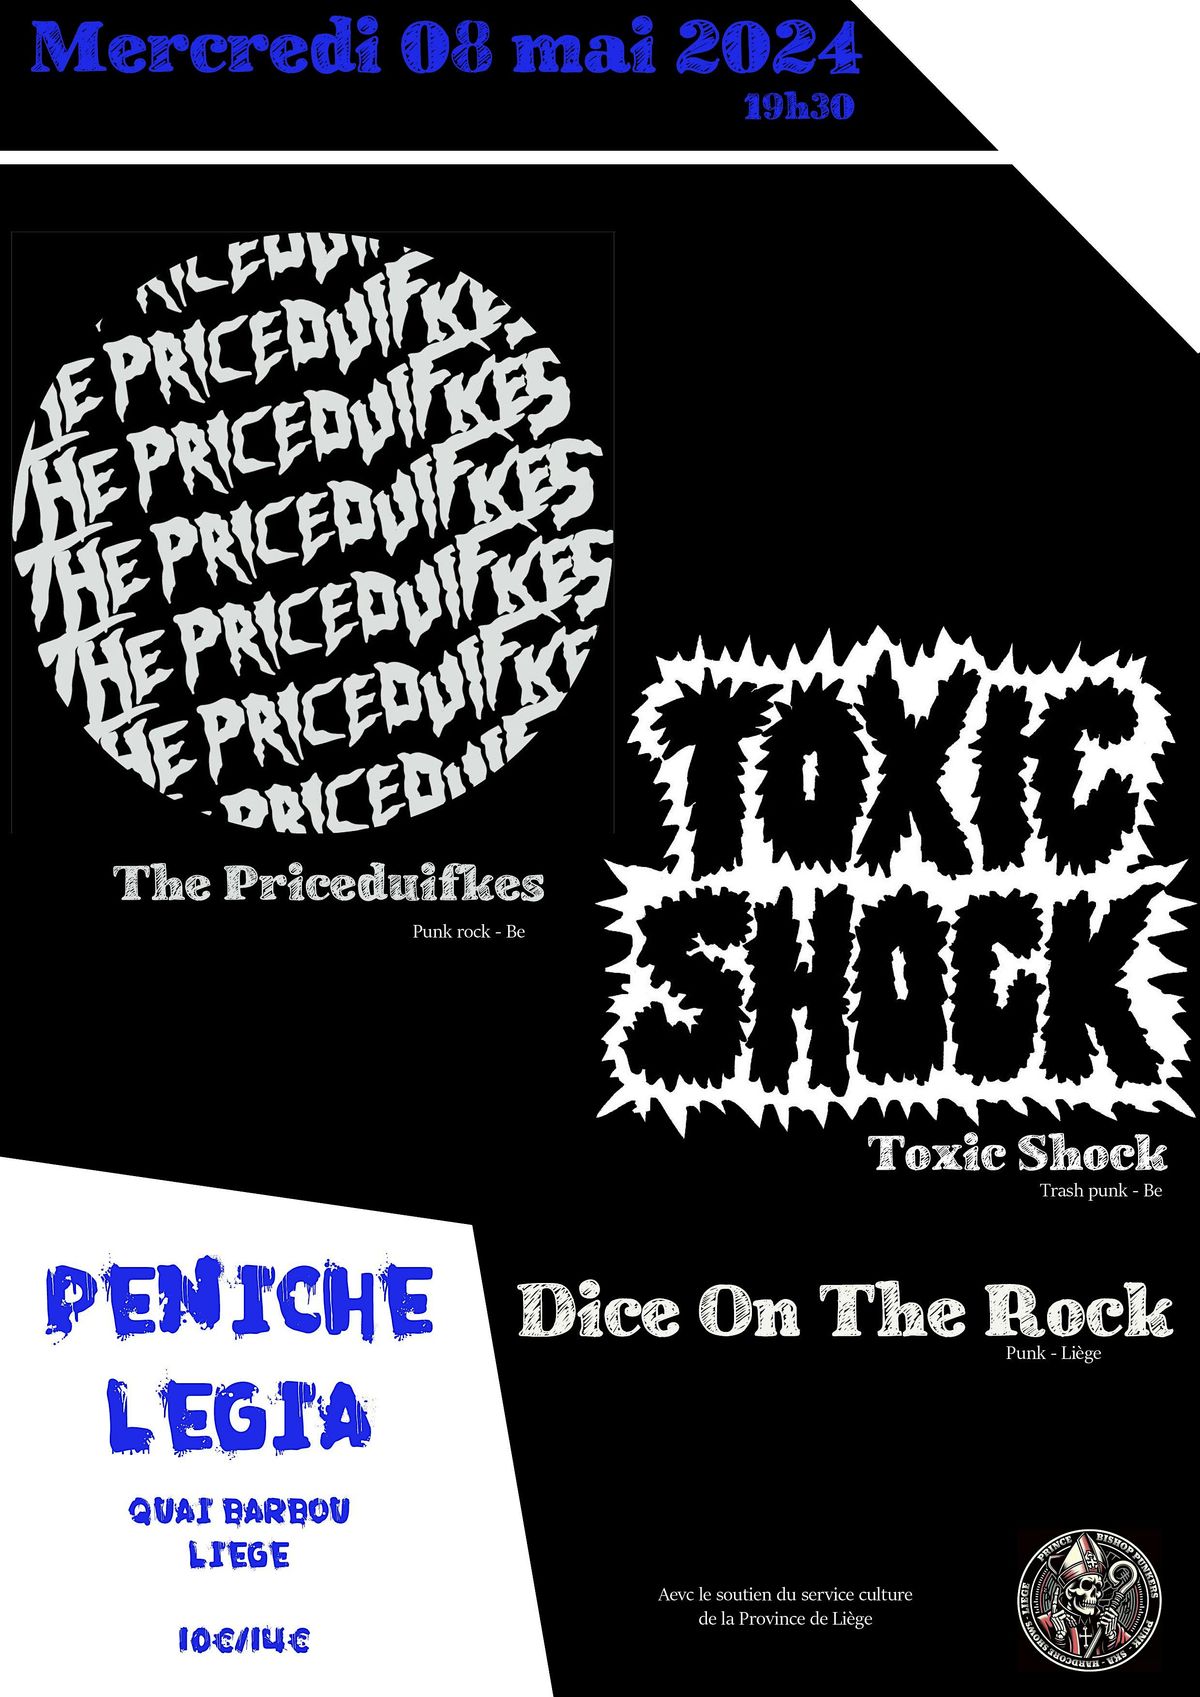 PBP Show: The Priceduifkes + Toxic Shock + Dice On The Rock